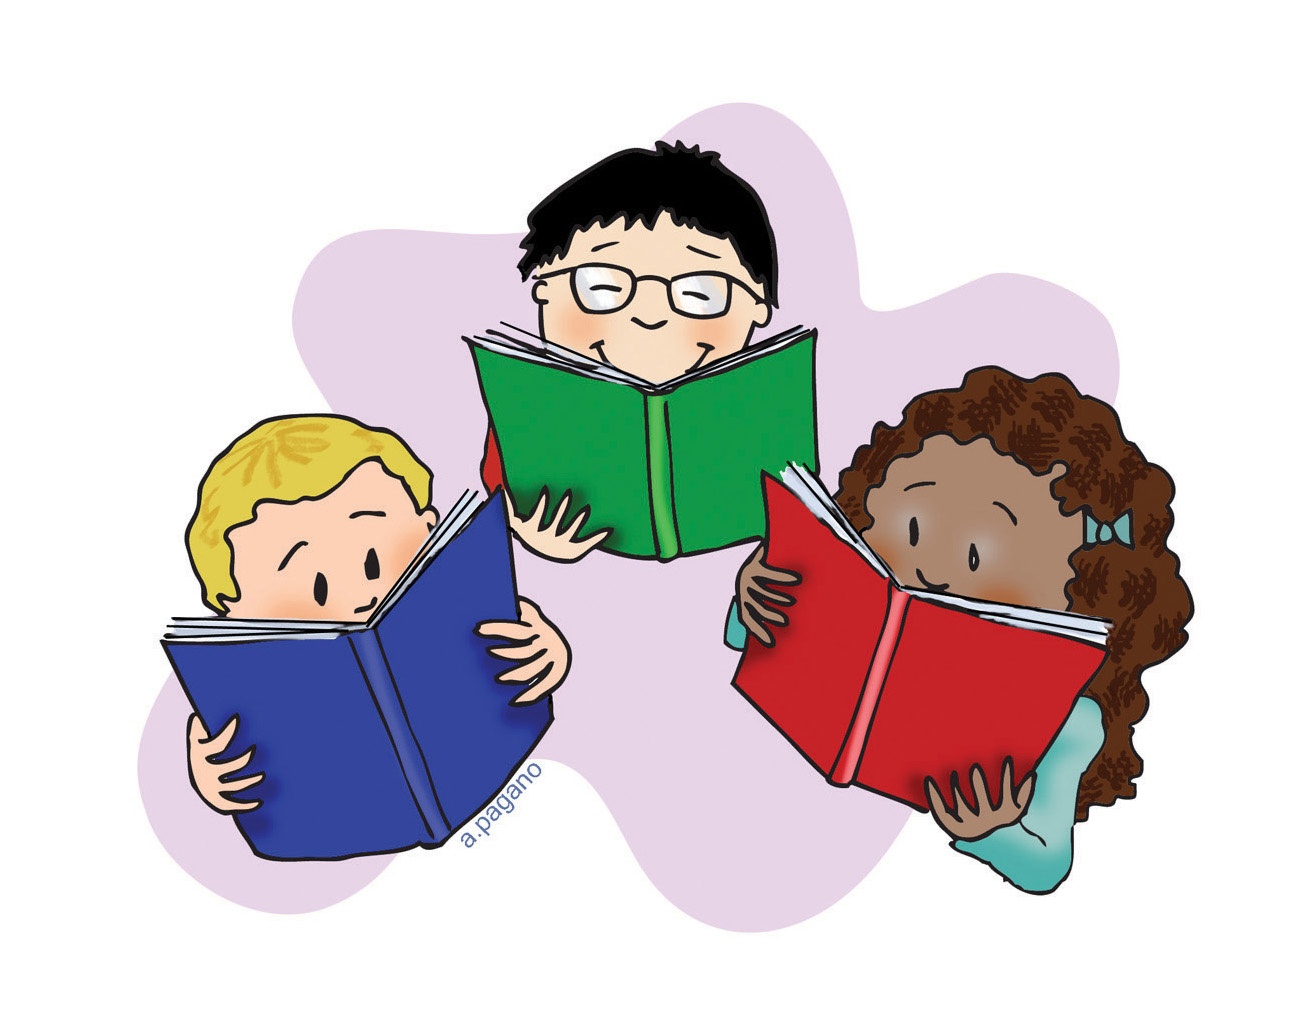 Free Children Reading Books Images, Download Free Clip Art